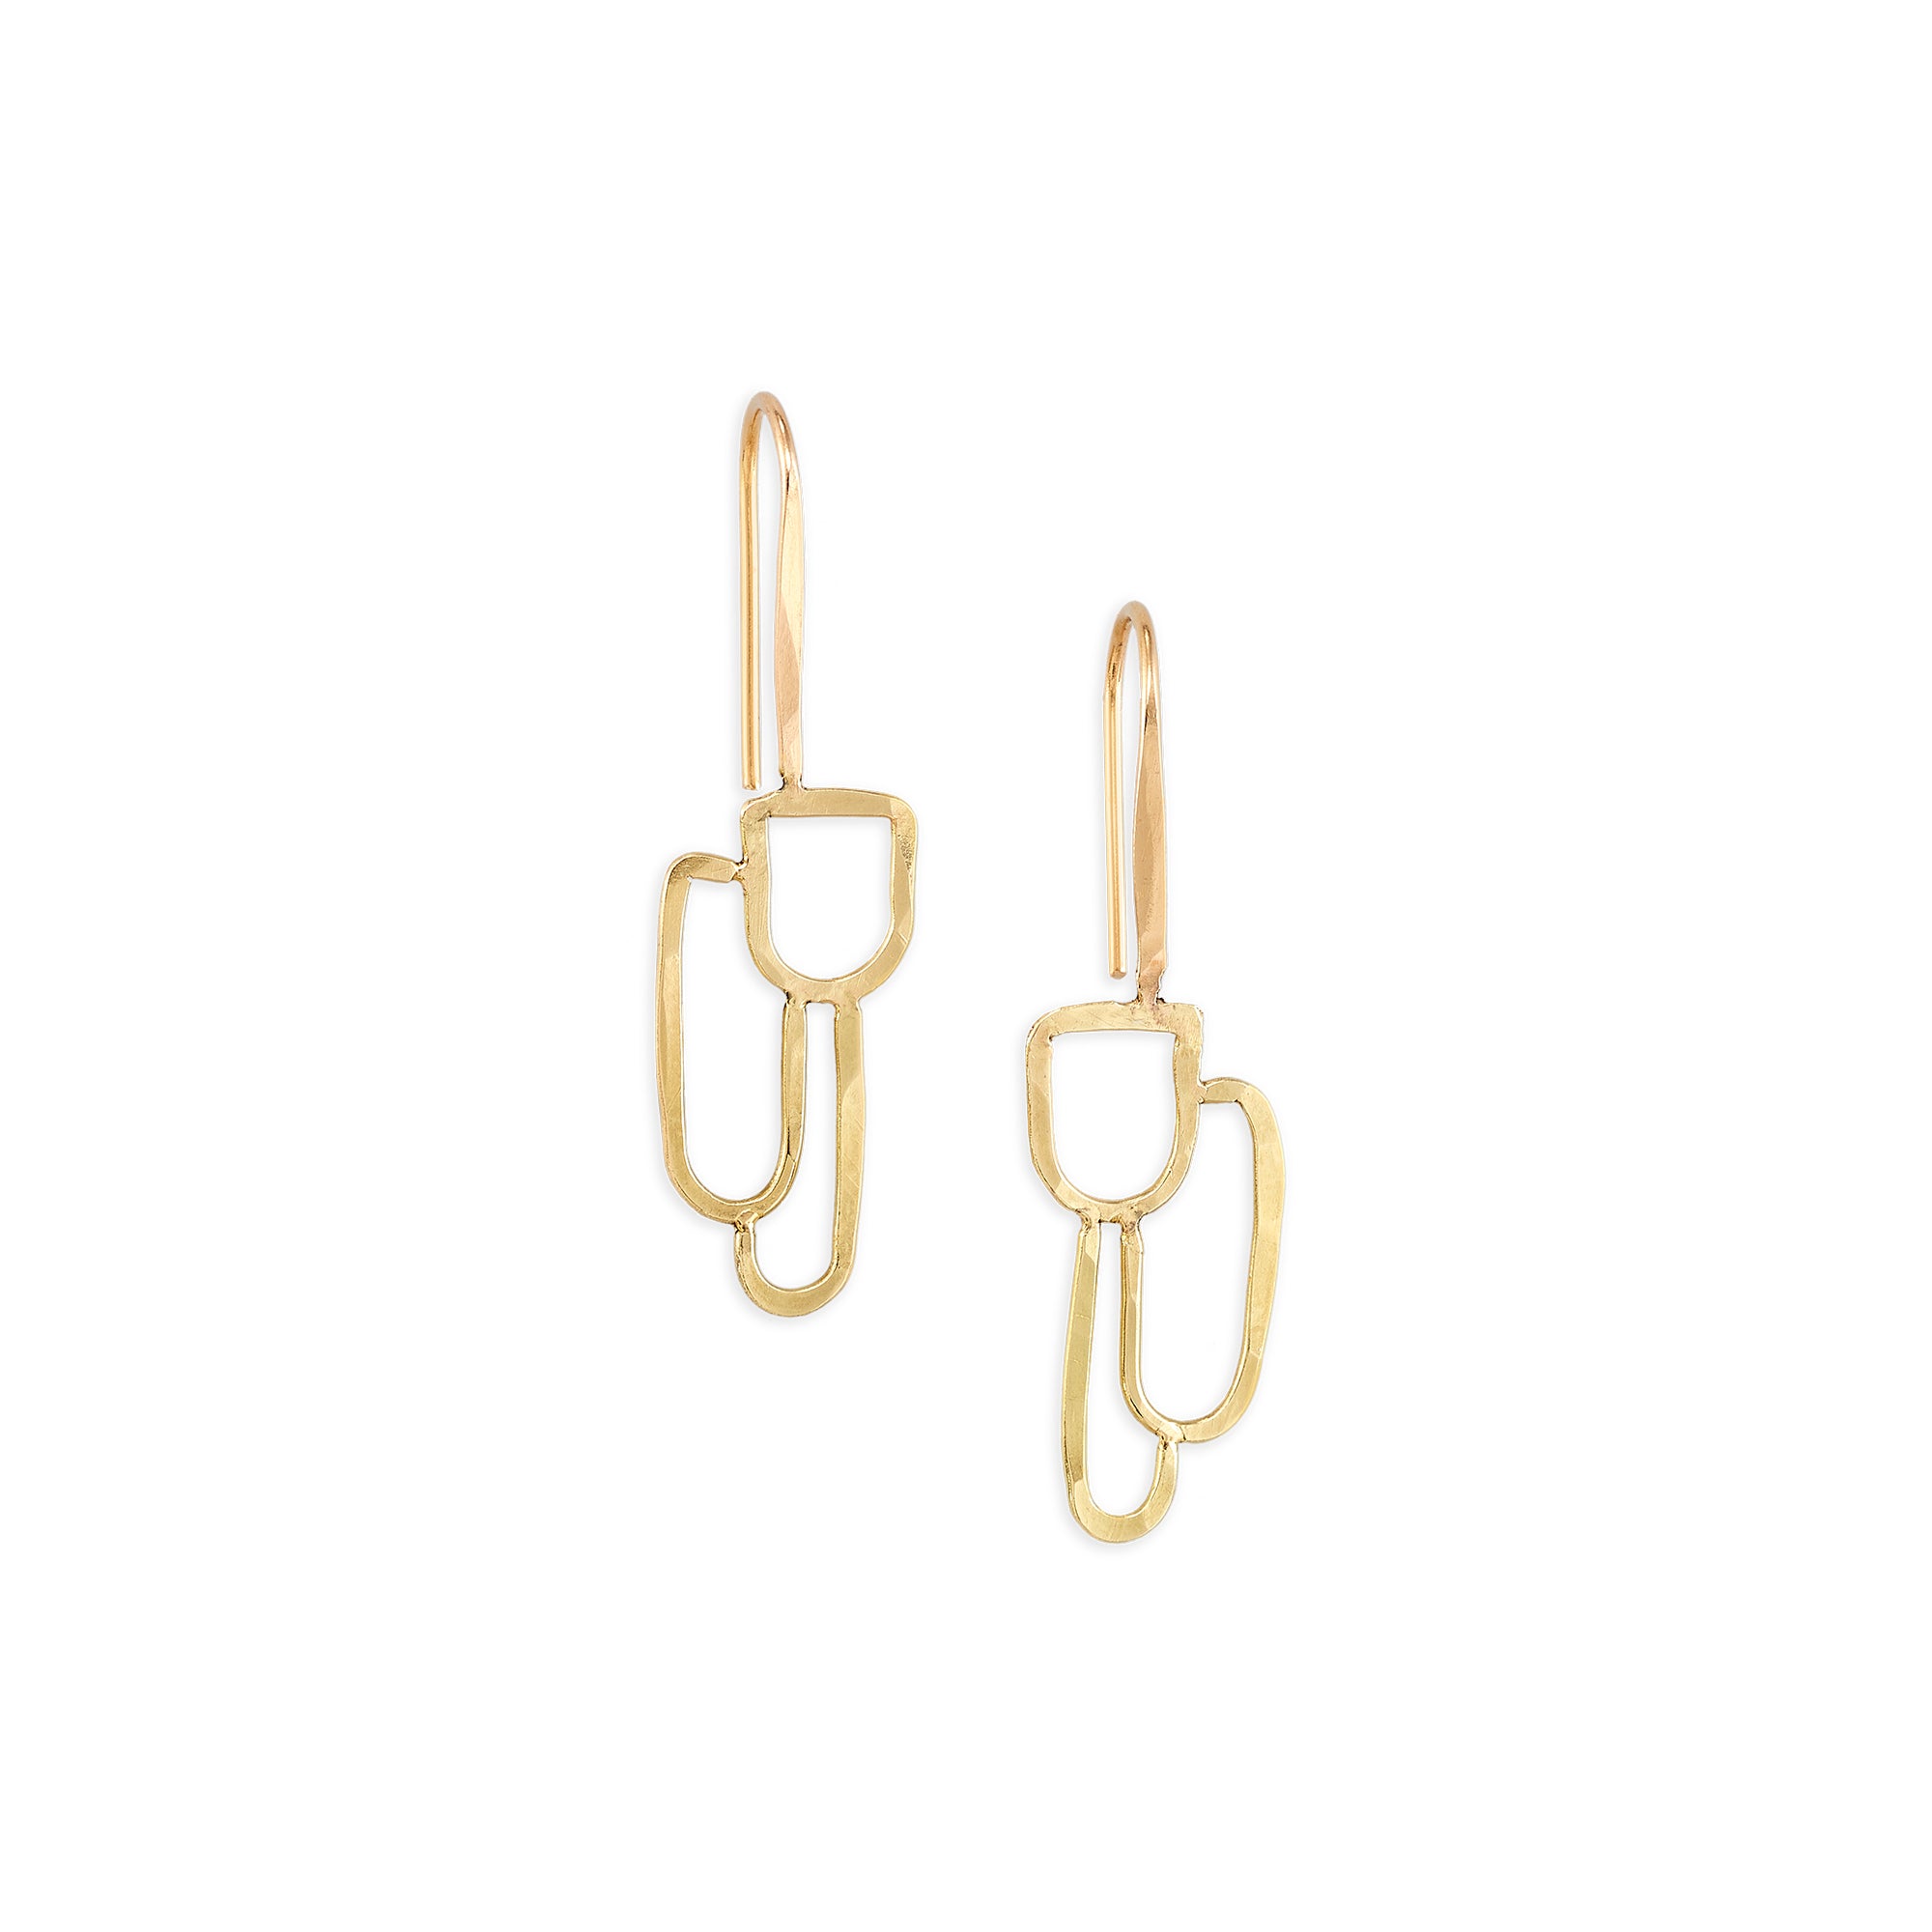 Multiverse Earrings in 14k gold, these delicate hook earrings are part of our Callen Thompson collaboration. 